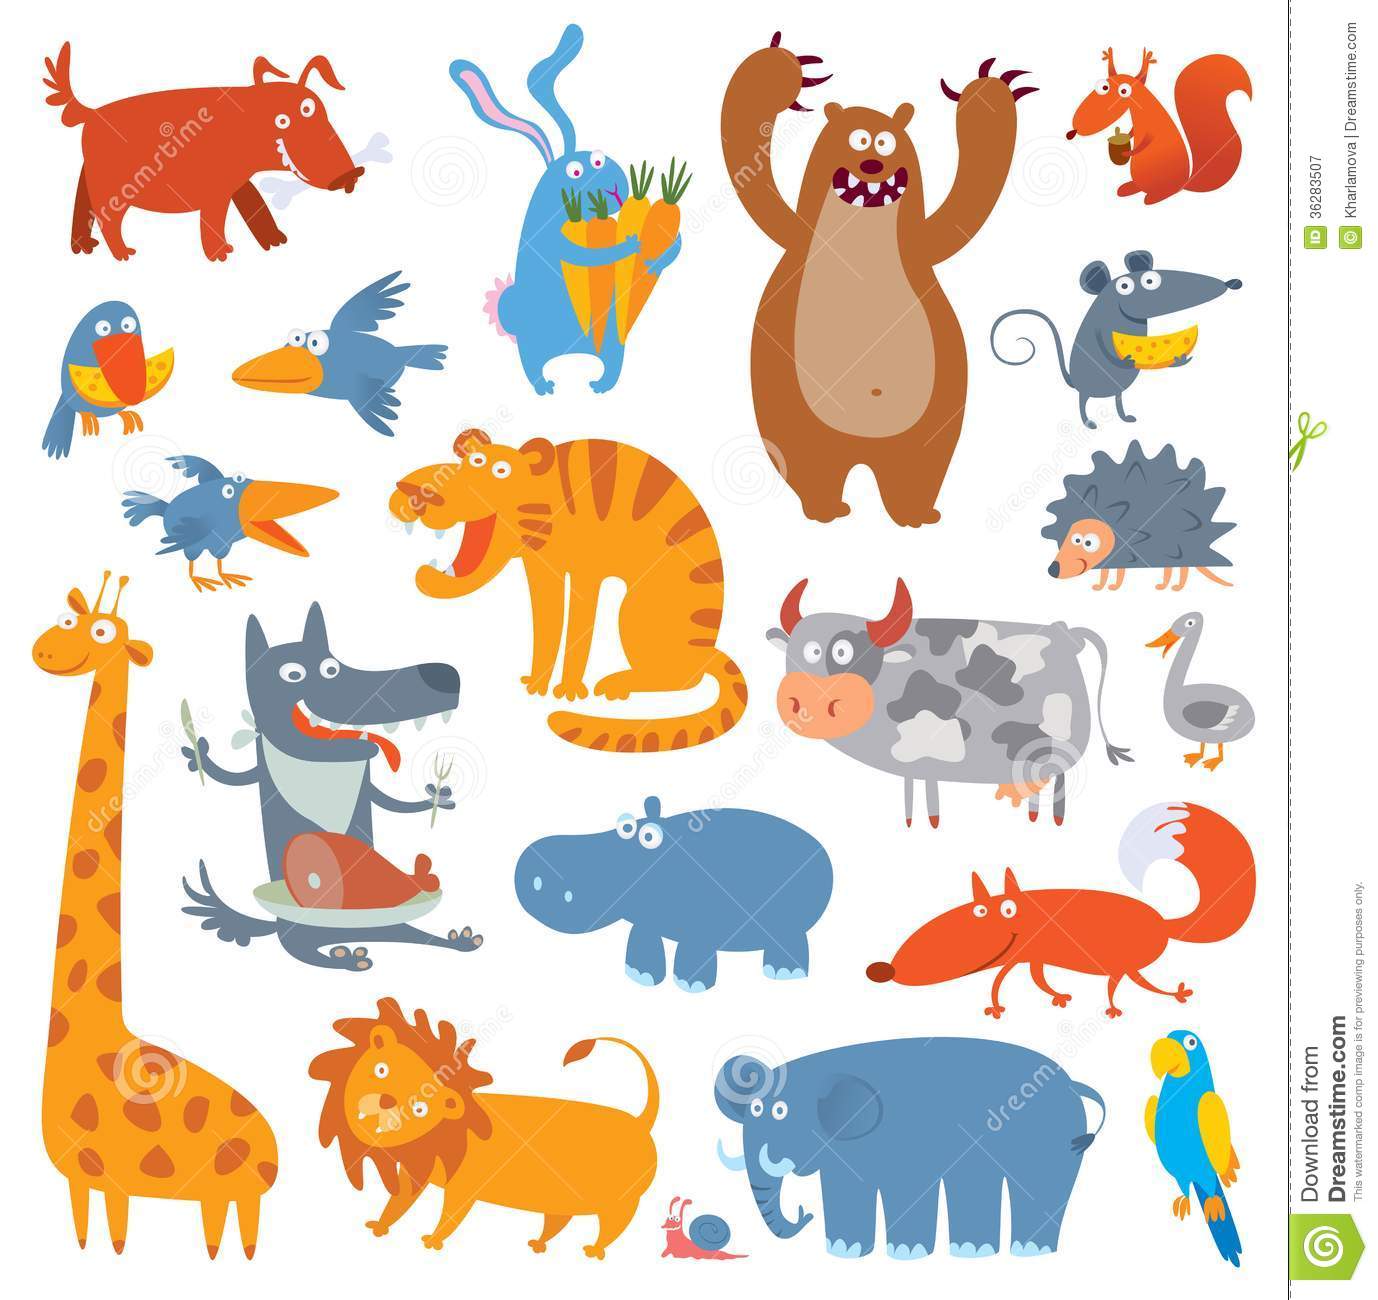 Cute Zoo Animals  Vector Illustration  Isolated On White Background